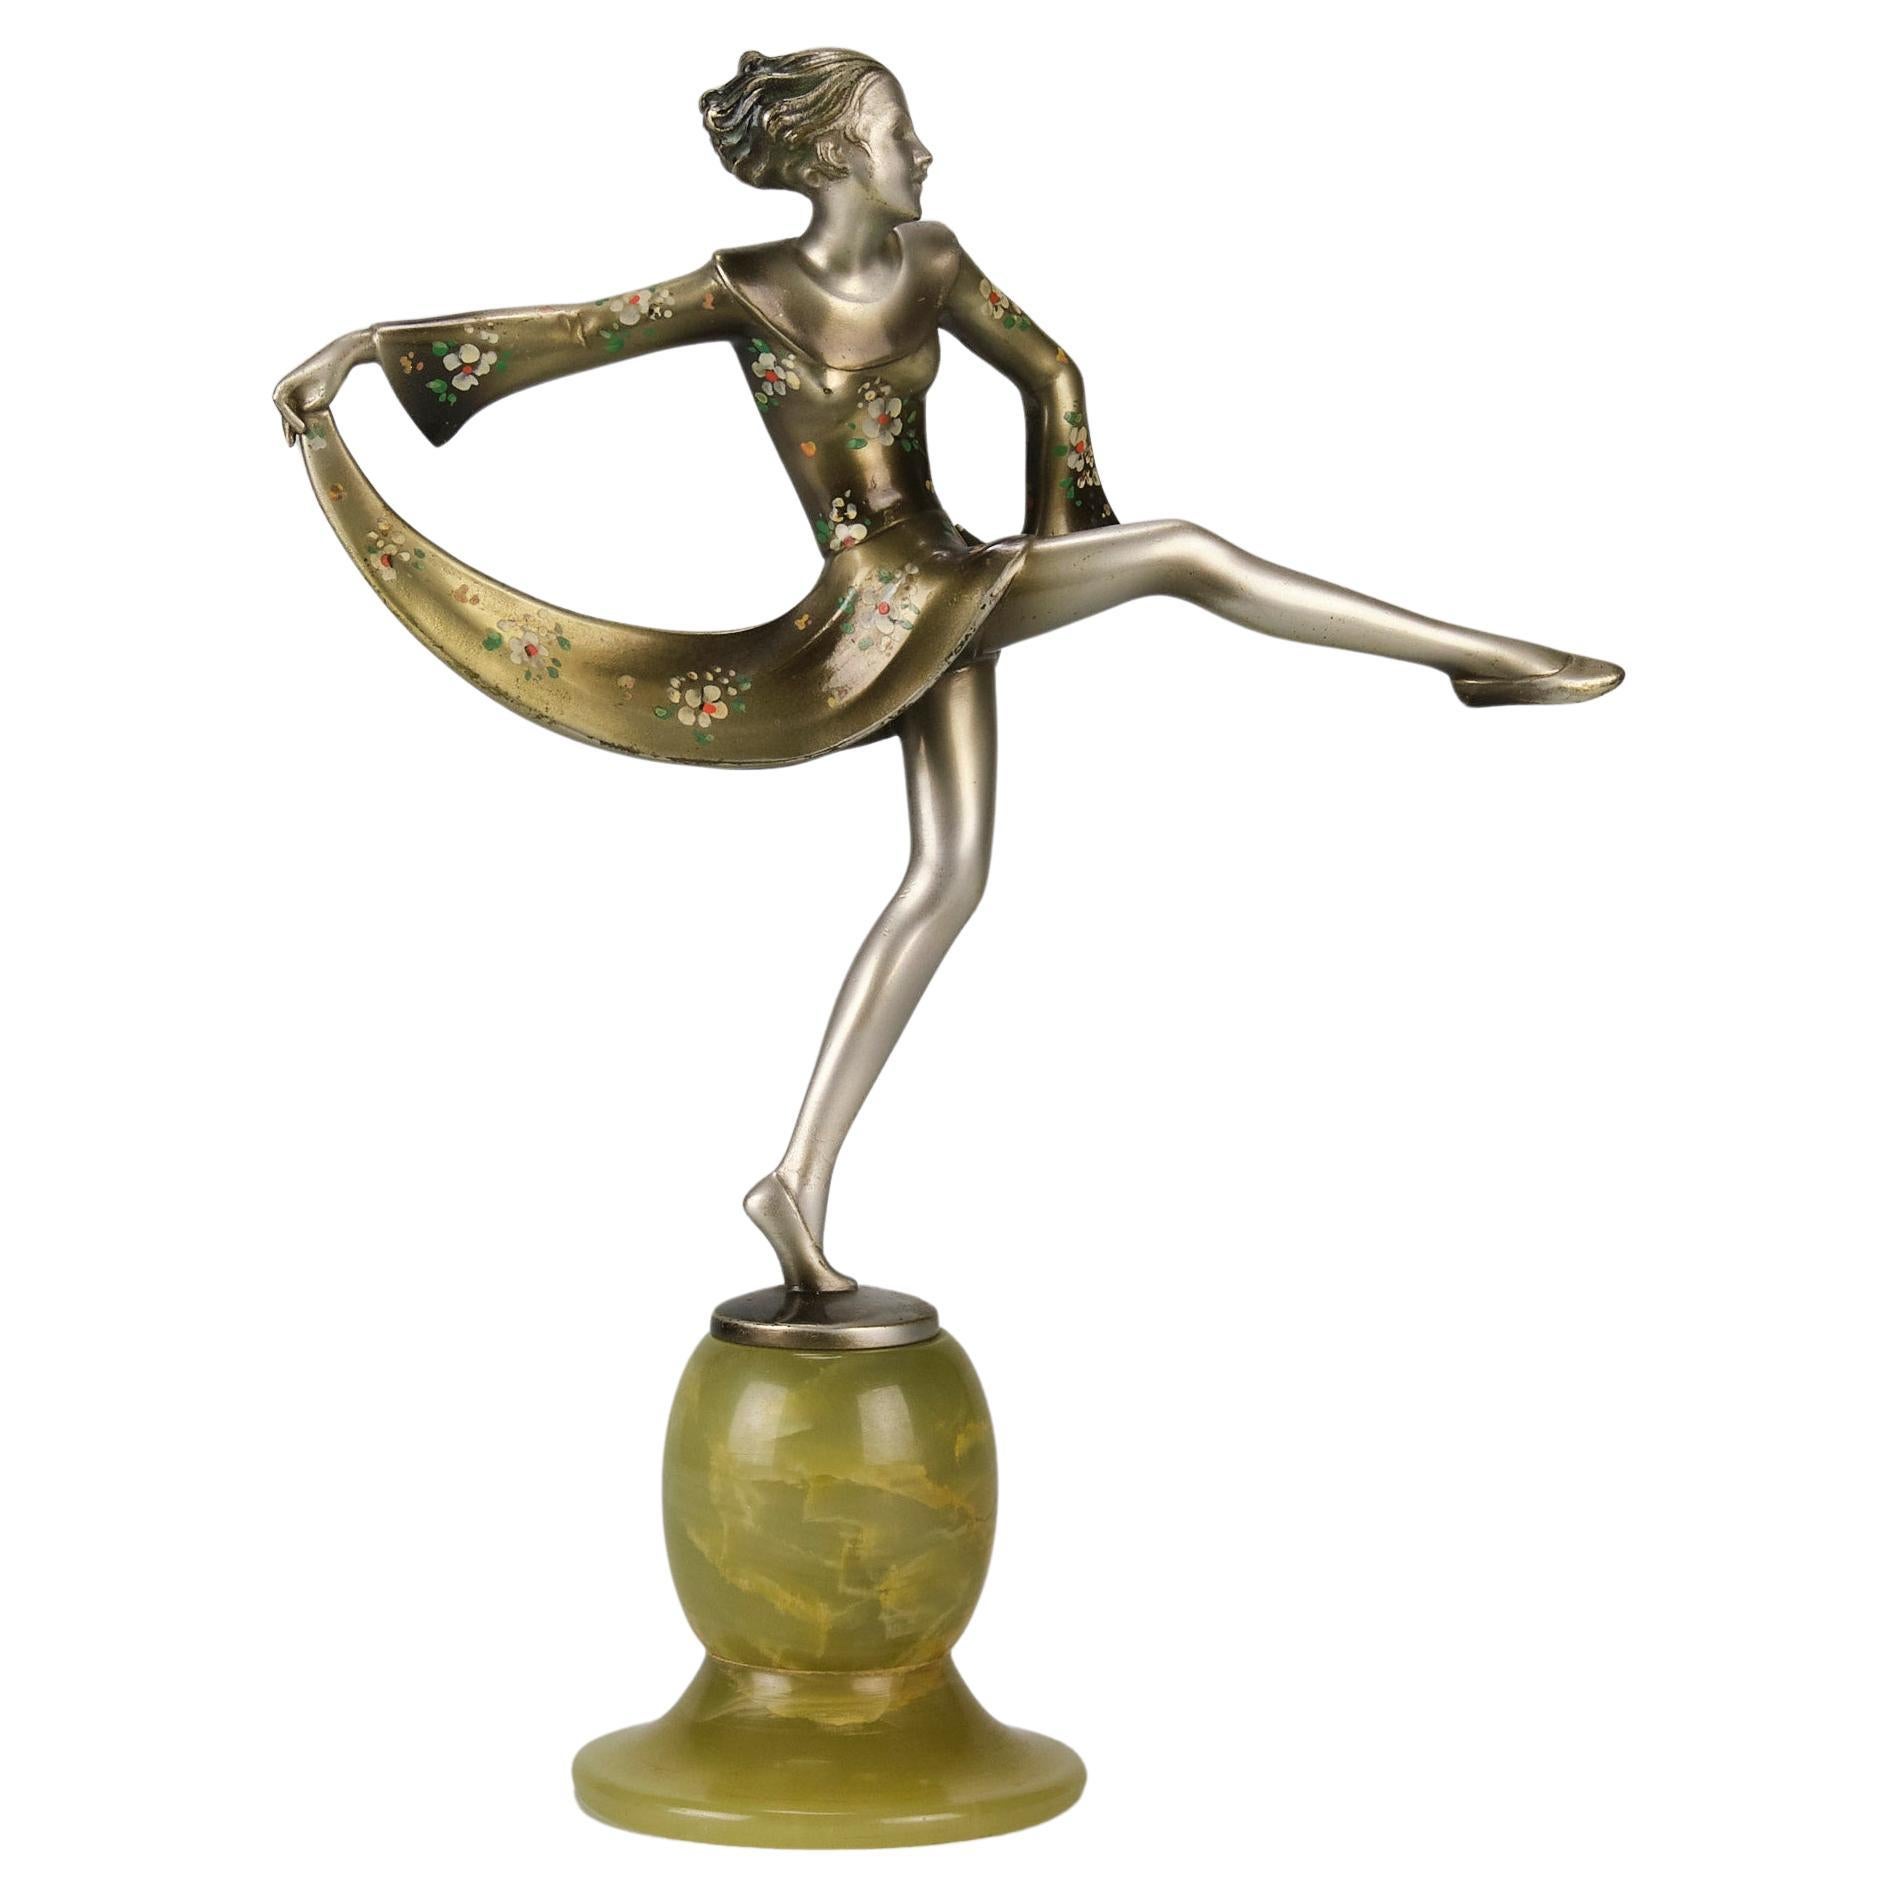 Early 20th Century Art Deco Cold-Painted Bronze "Amelie" by Lorenzl & Crejo